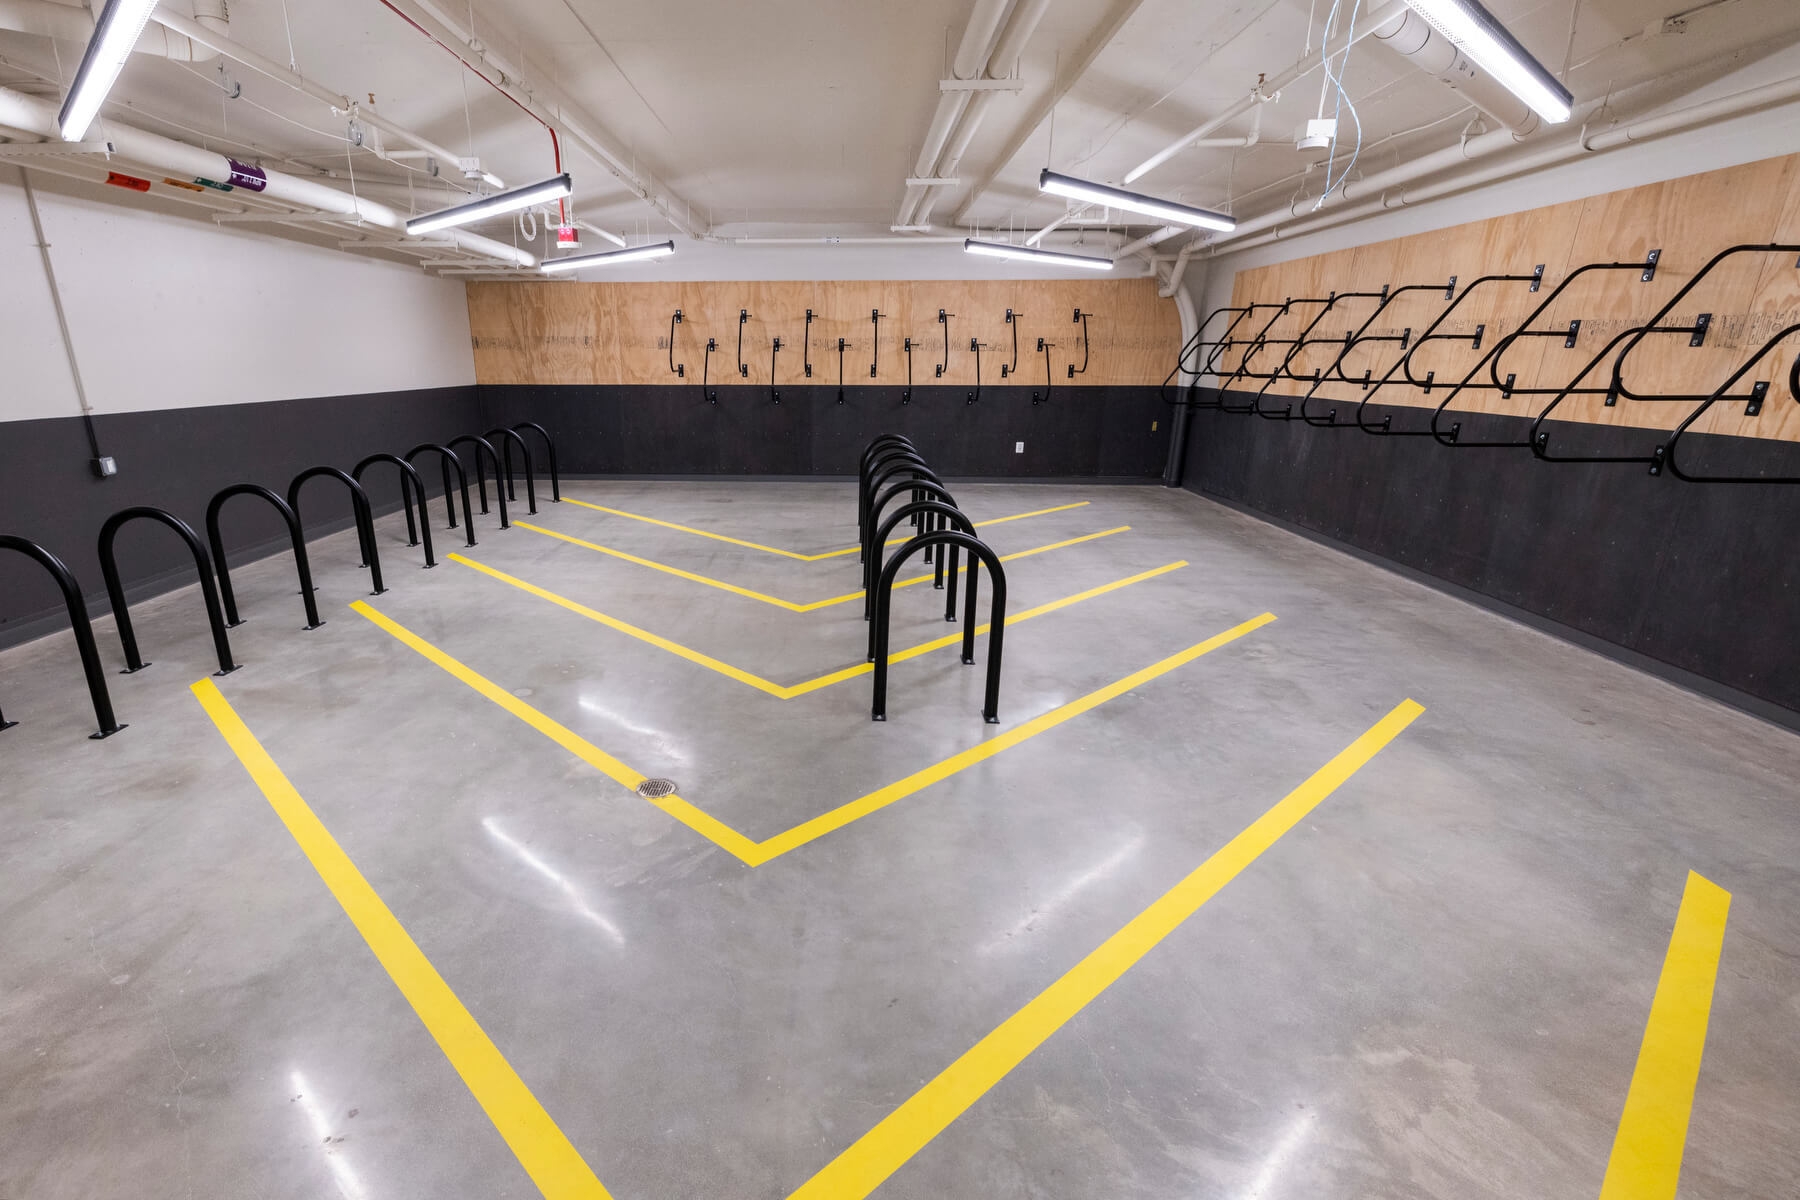 An image of an indoor bike parking garage at Amazon's HQ2